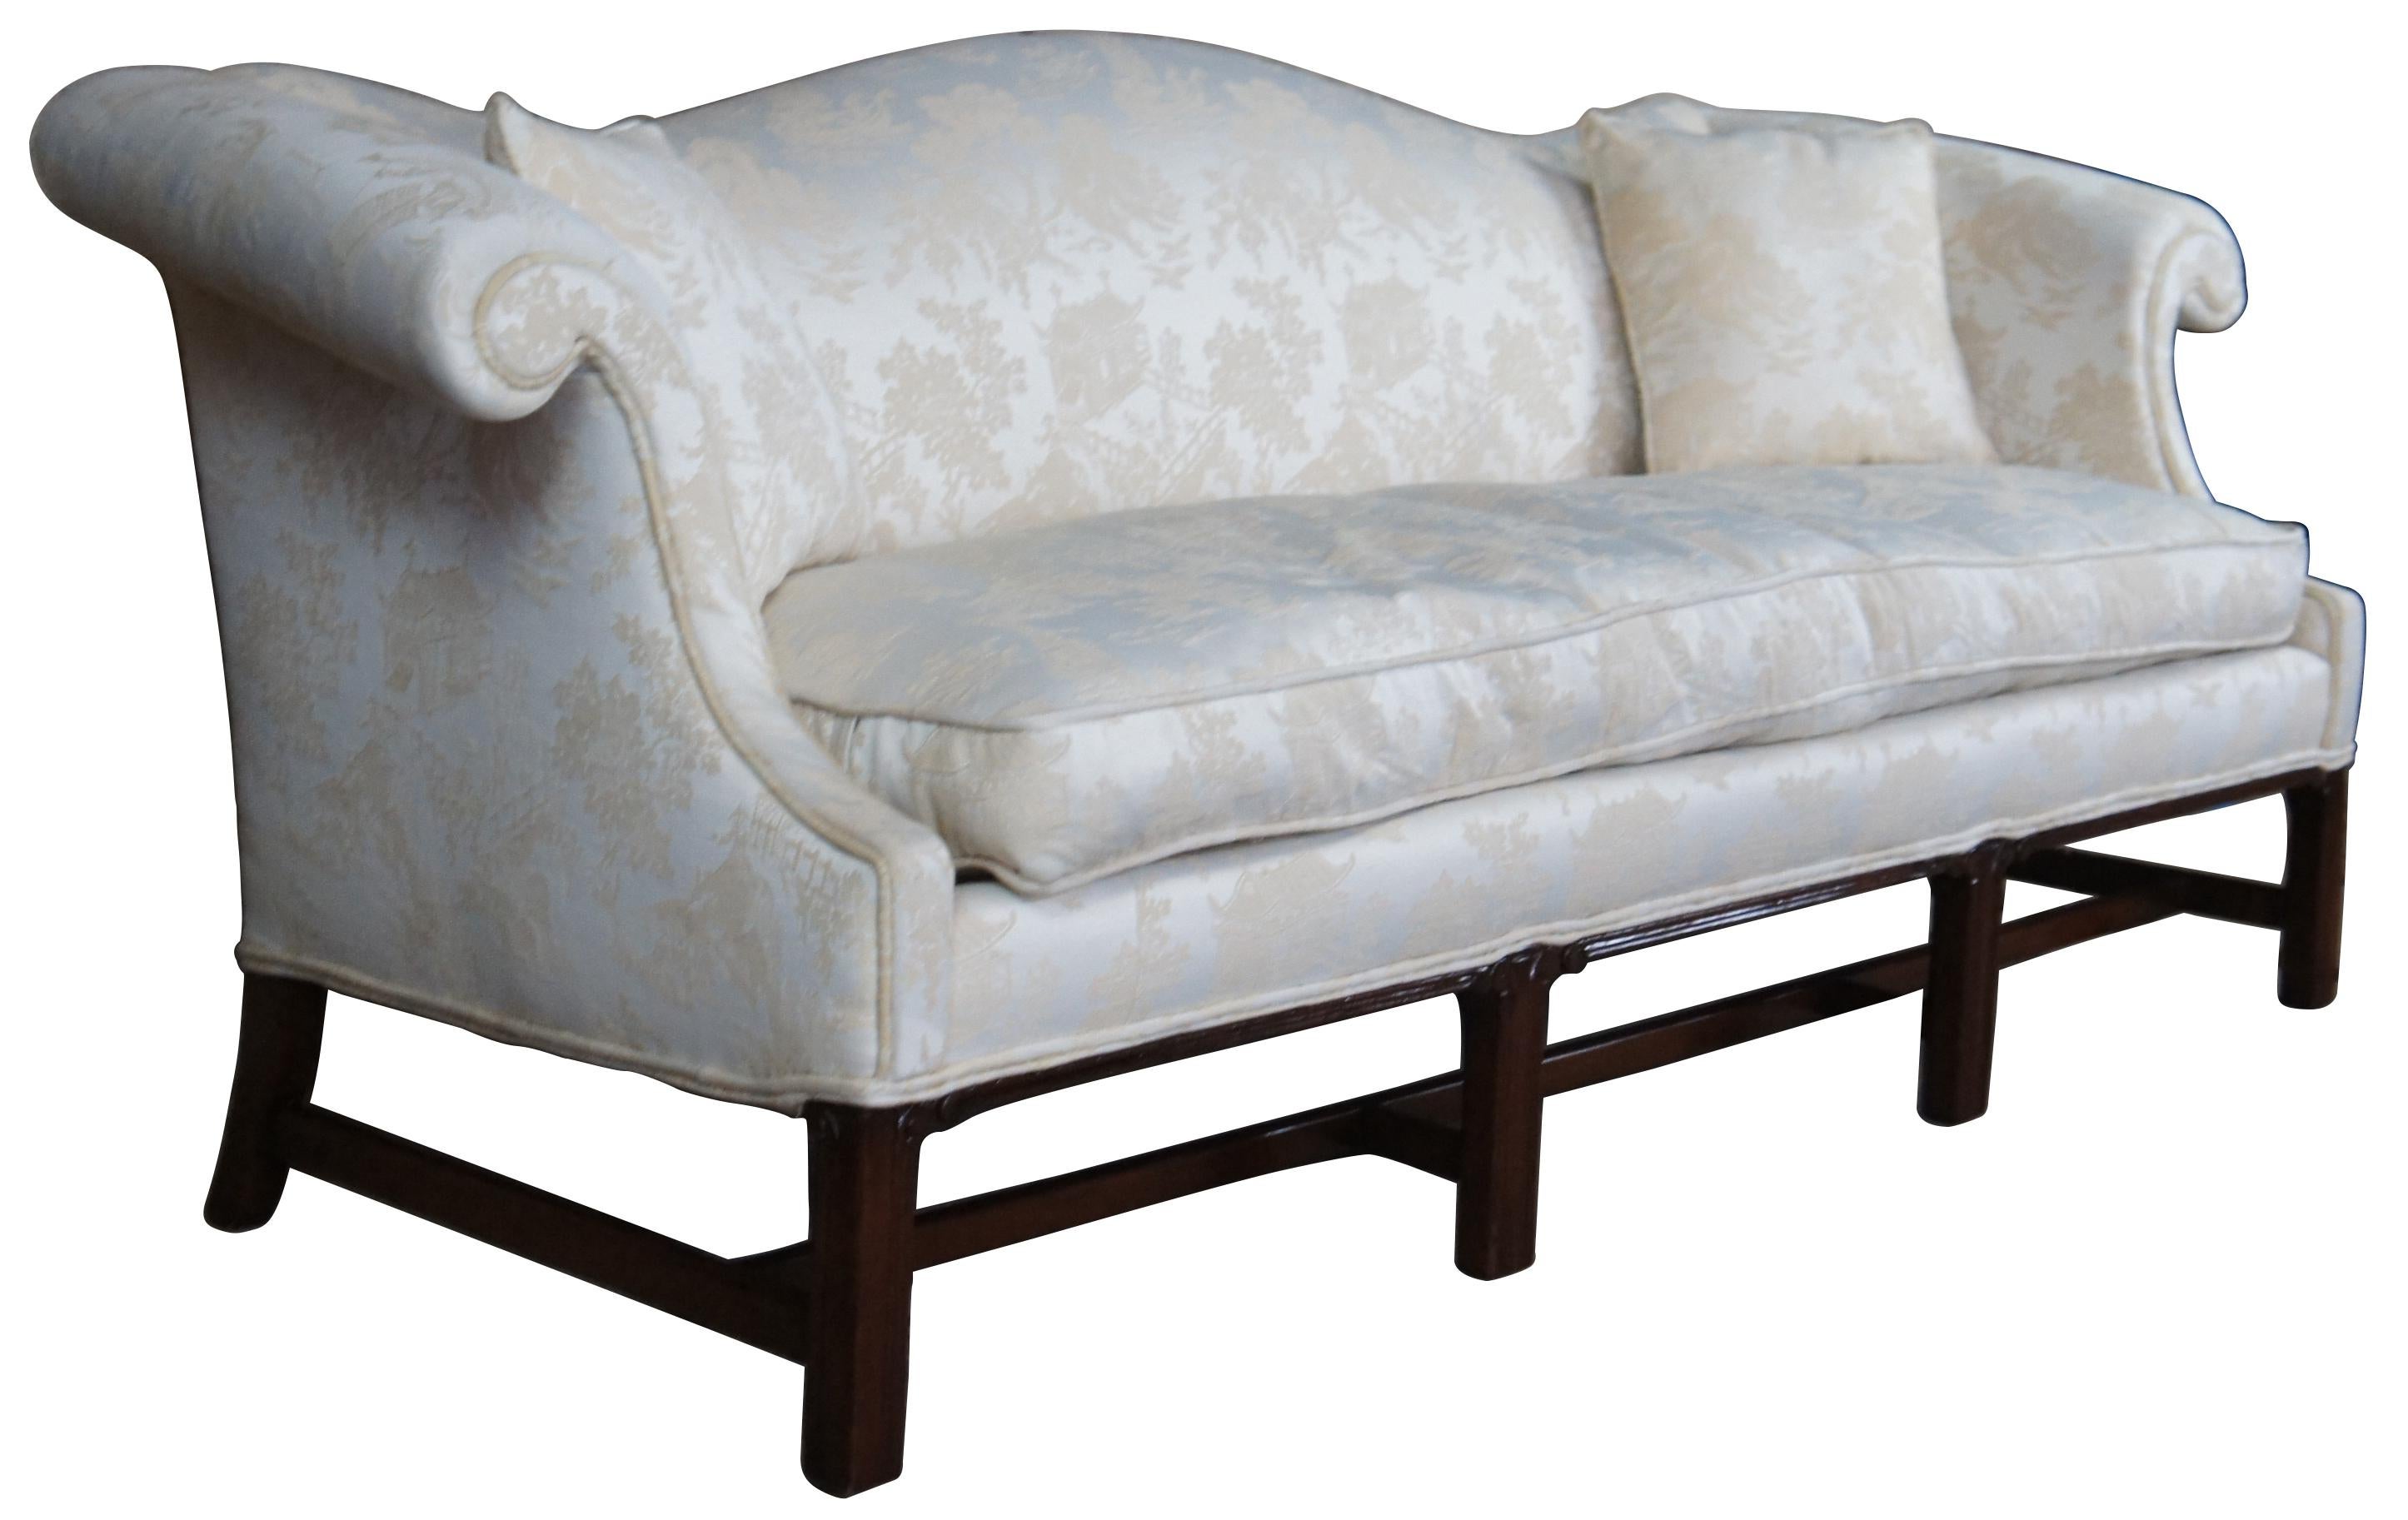 Hickory chair Chippendale Camelback sofa. Made from American Mahogany with rolled arms and fluted straight legs connected by an H stretcher. Upholstered in an off-white pagoda scene with elegant sheen.
 